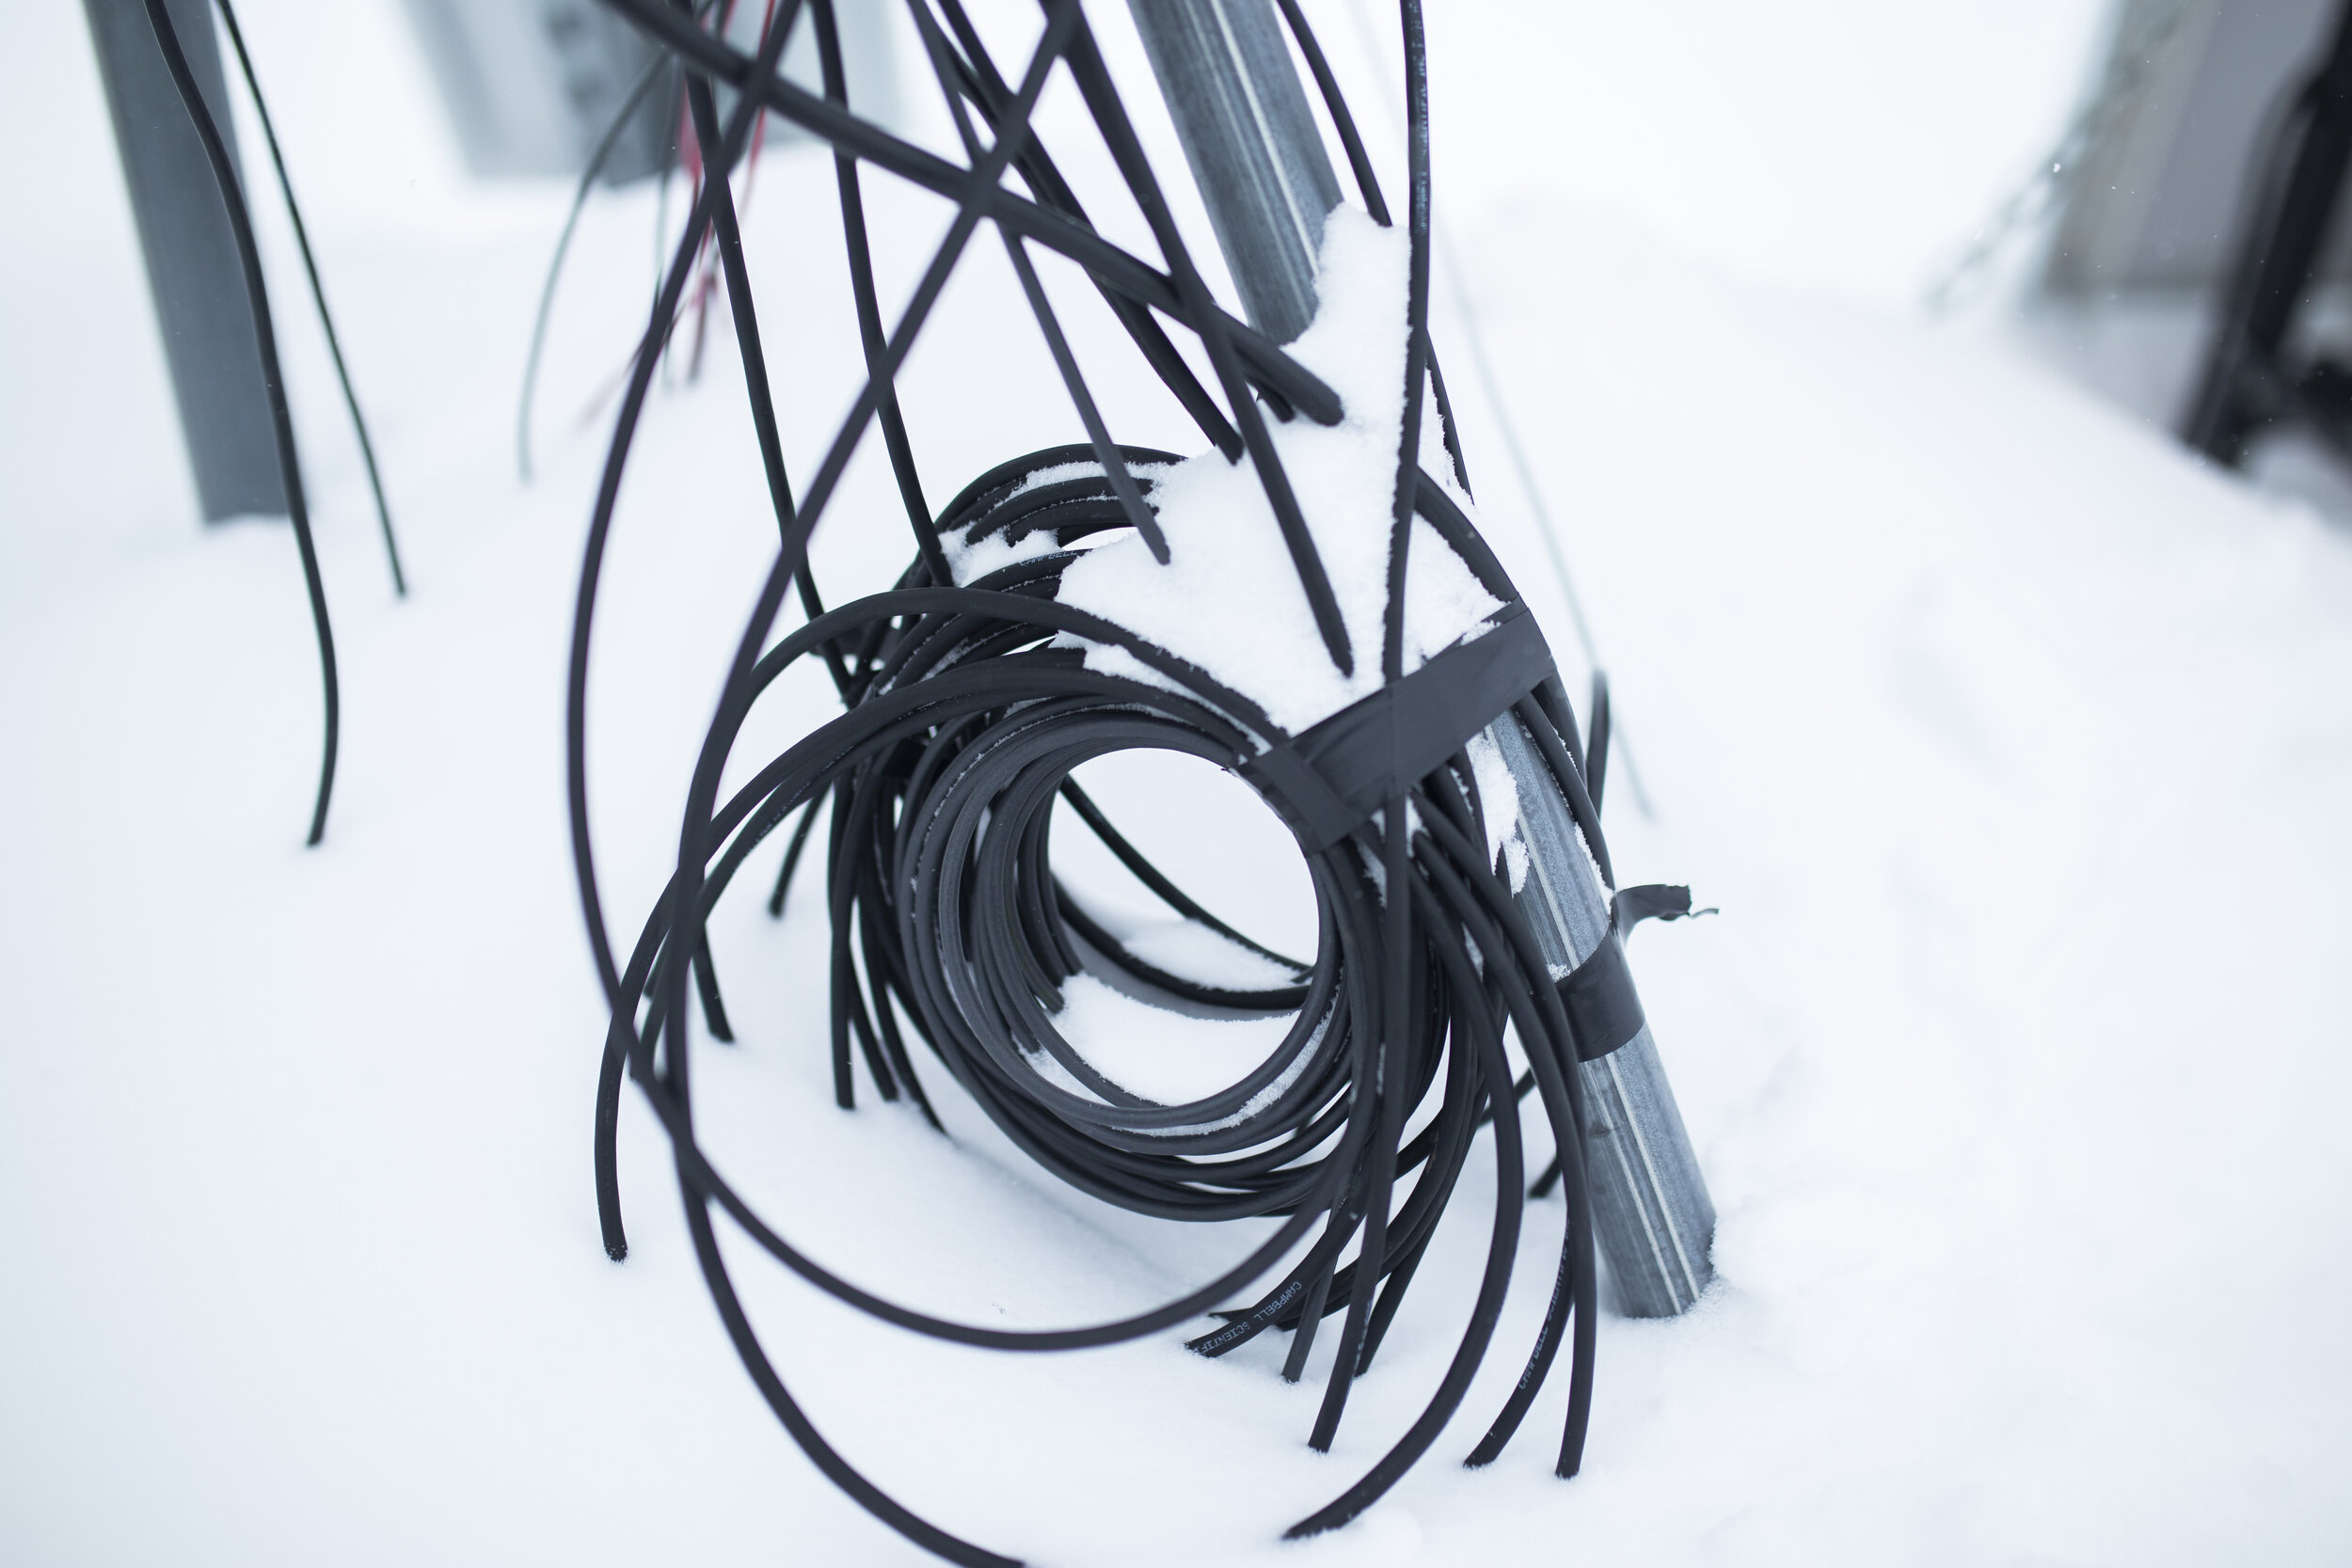  Weather Station cables buried in snow. 